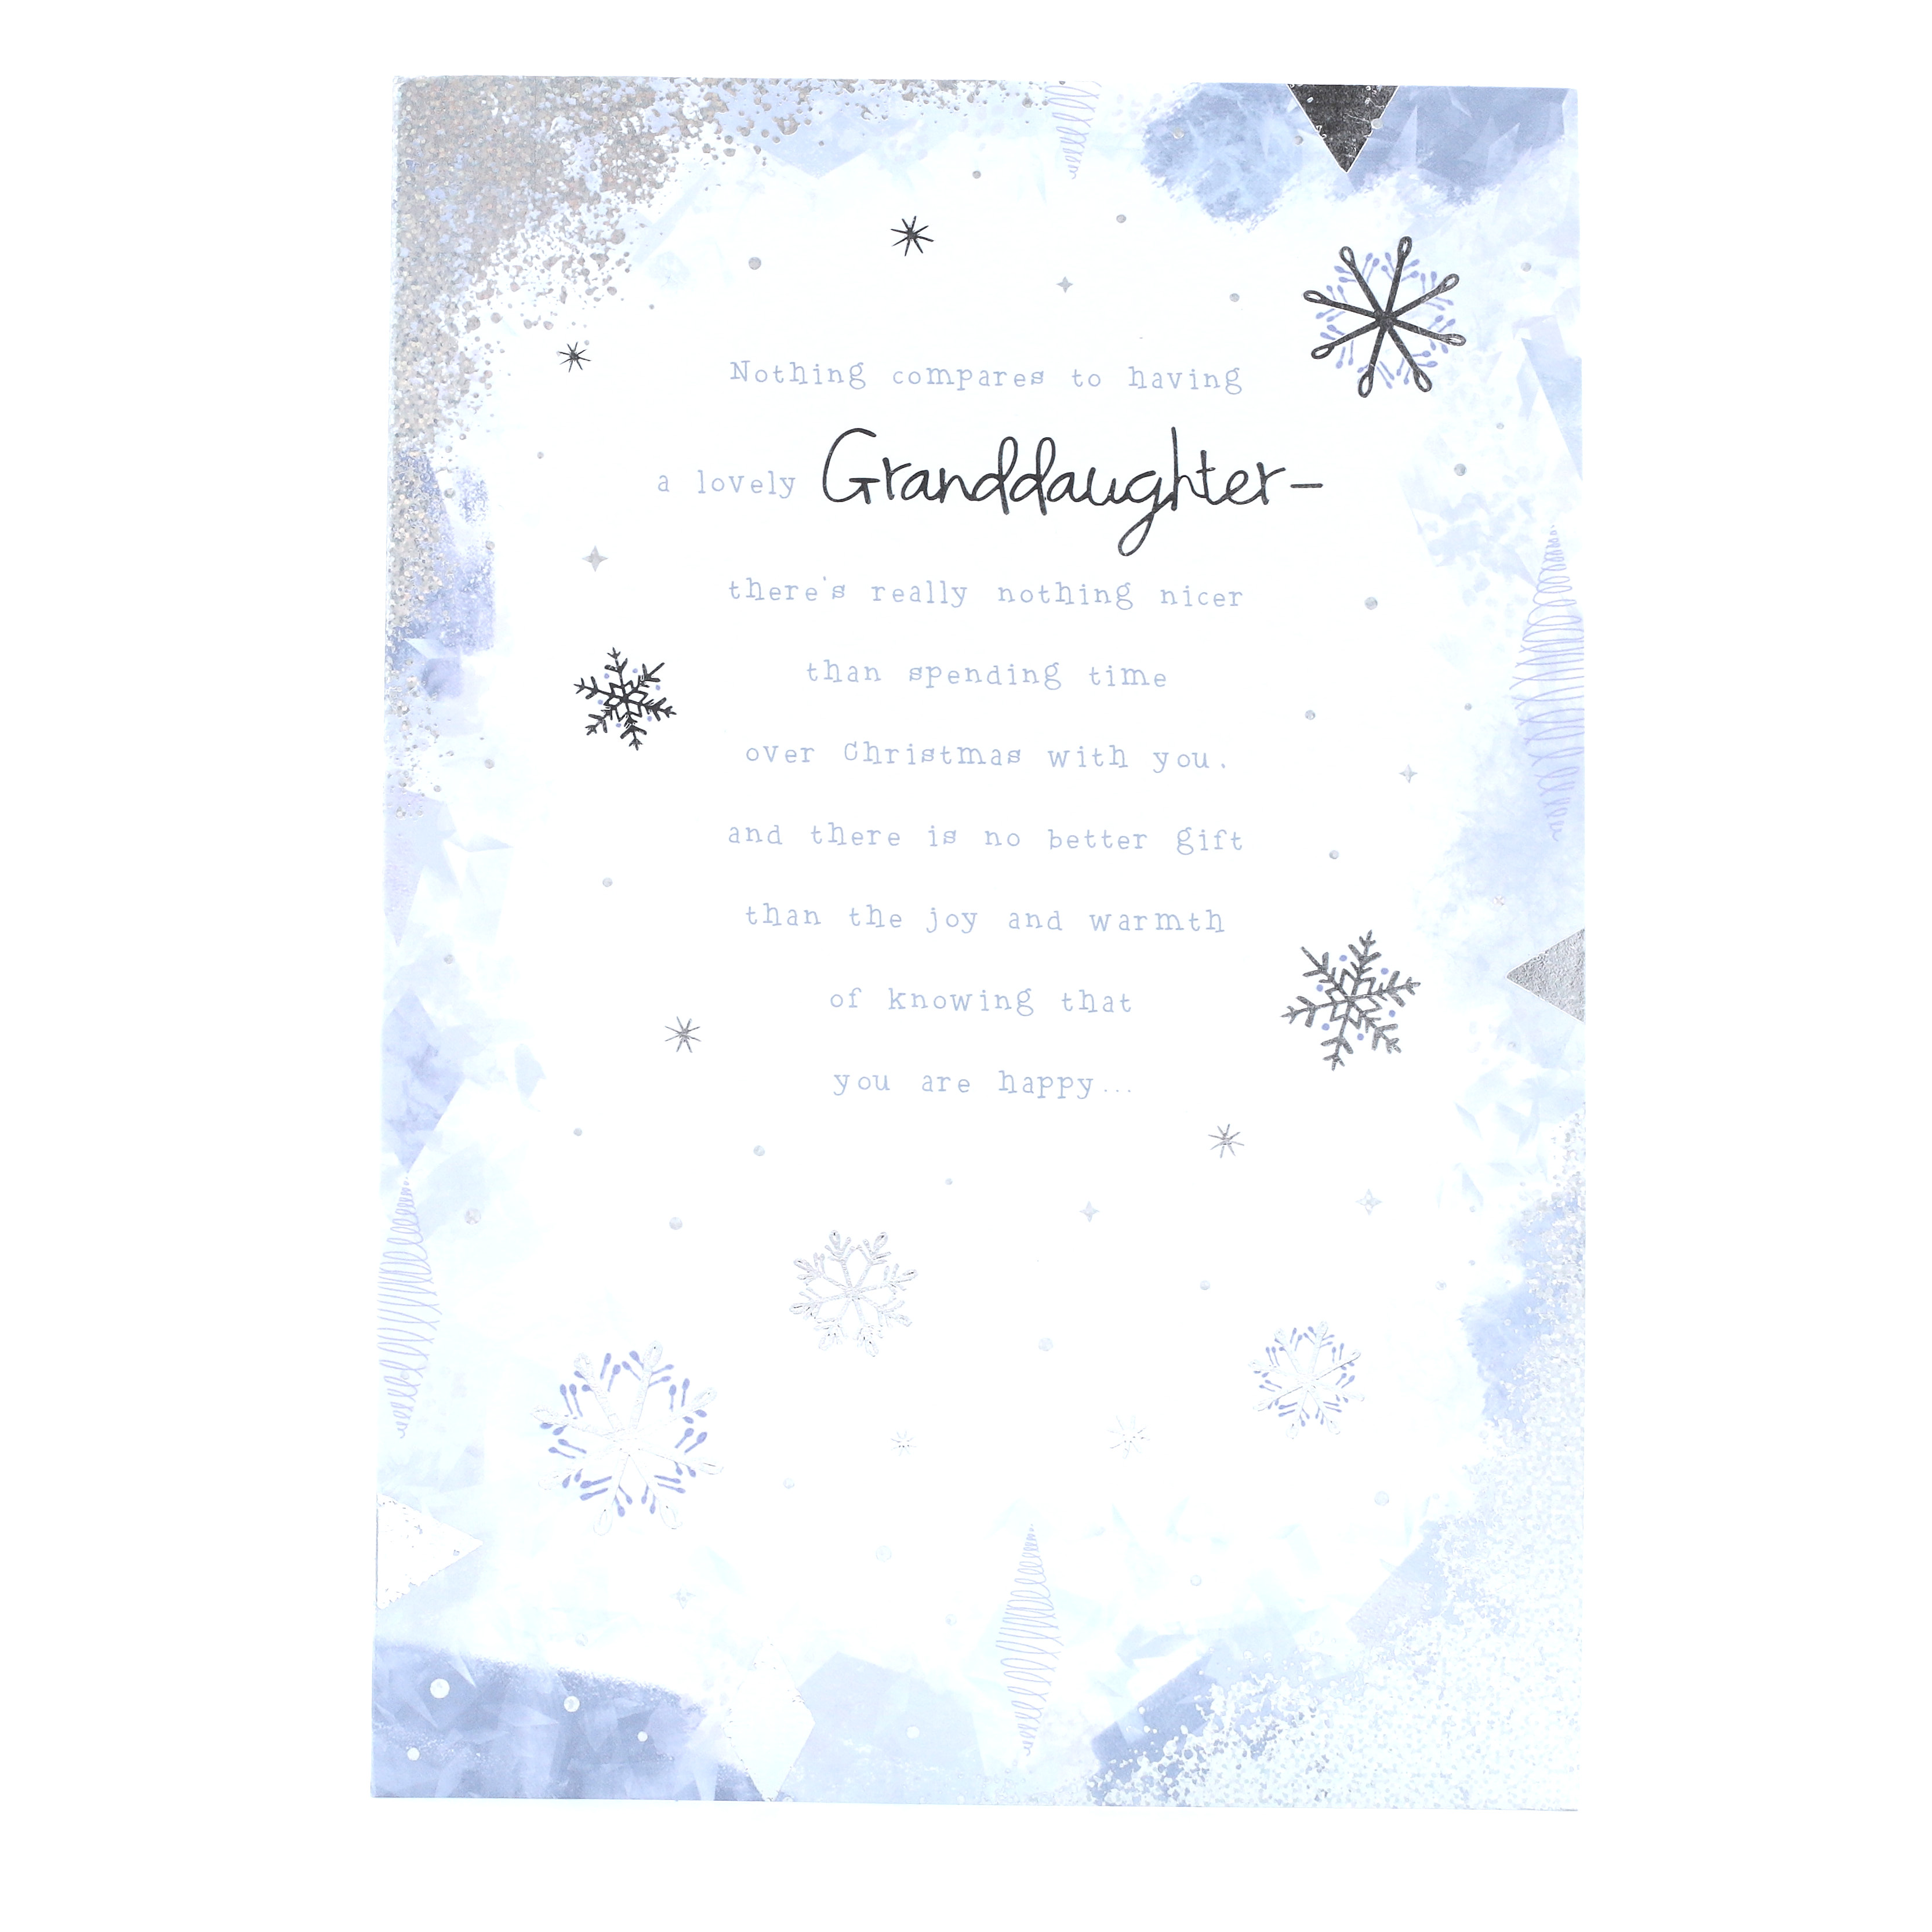 Christmas Card - Granddaughter, Classic Verse